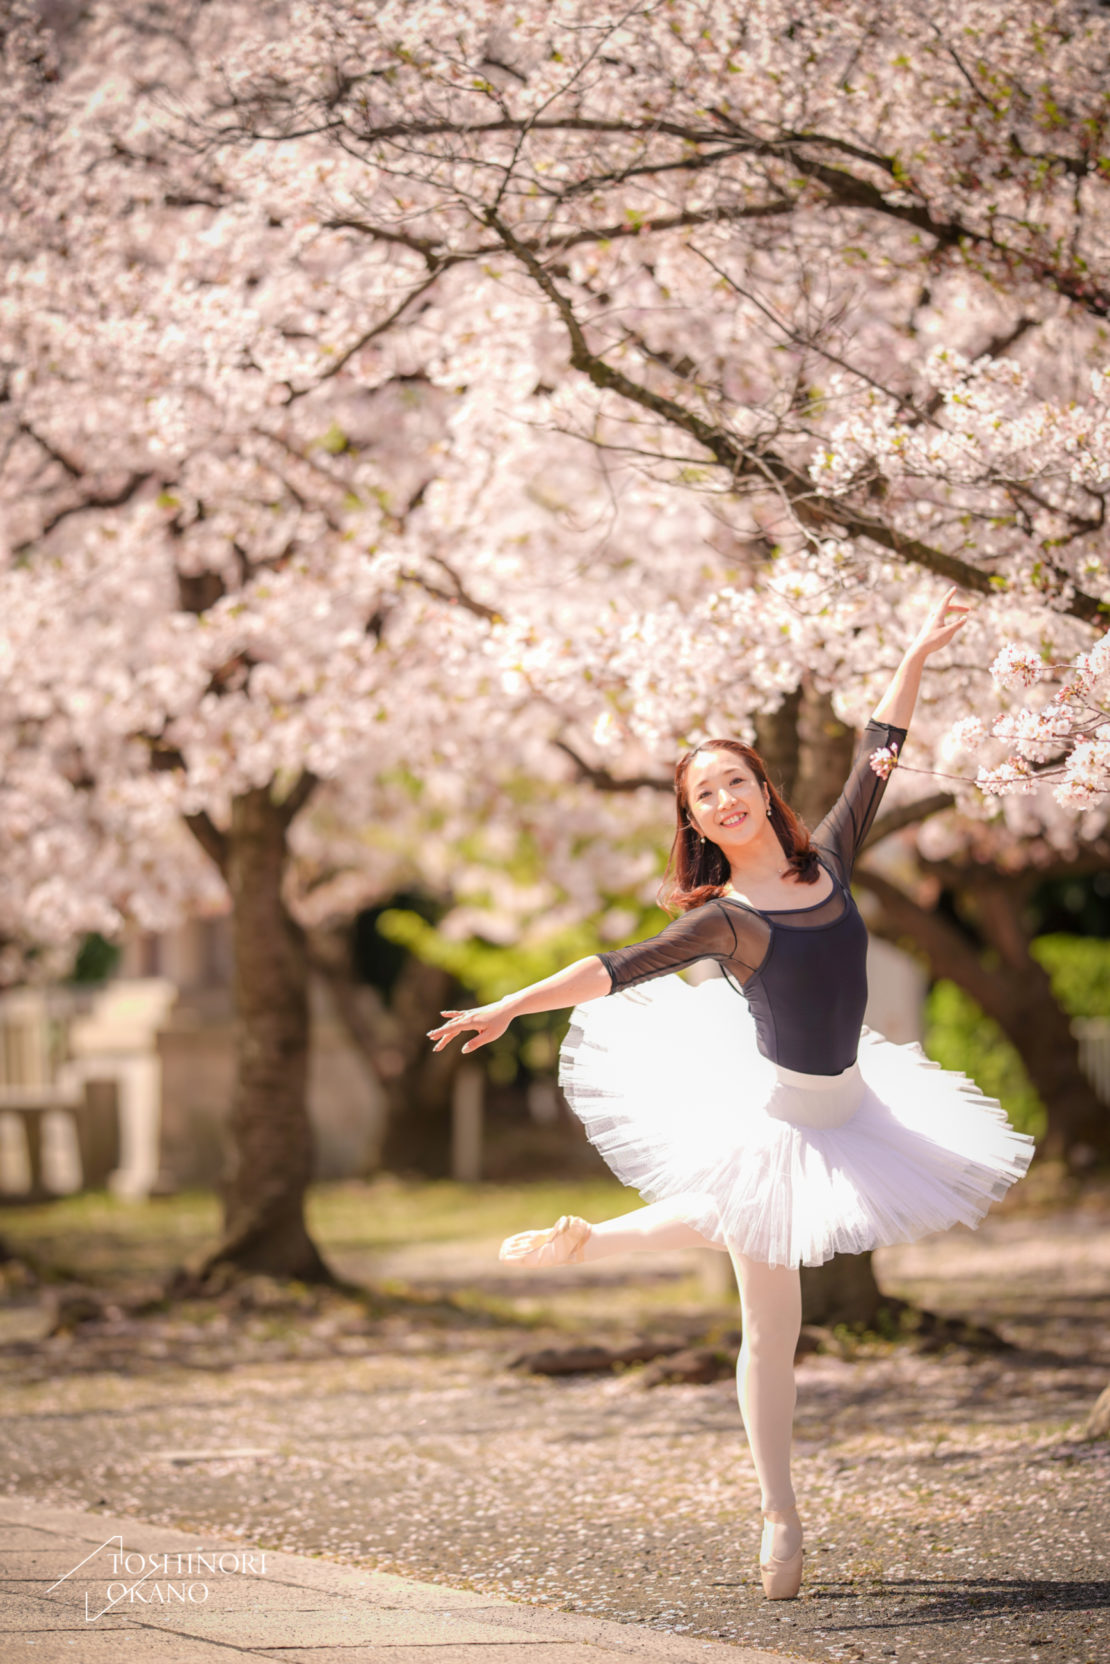 photo 49 Cherry blossom and ballet